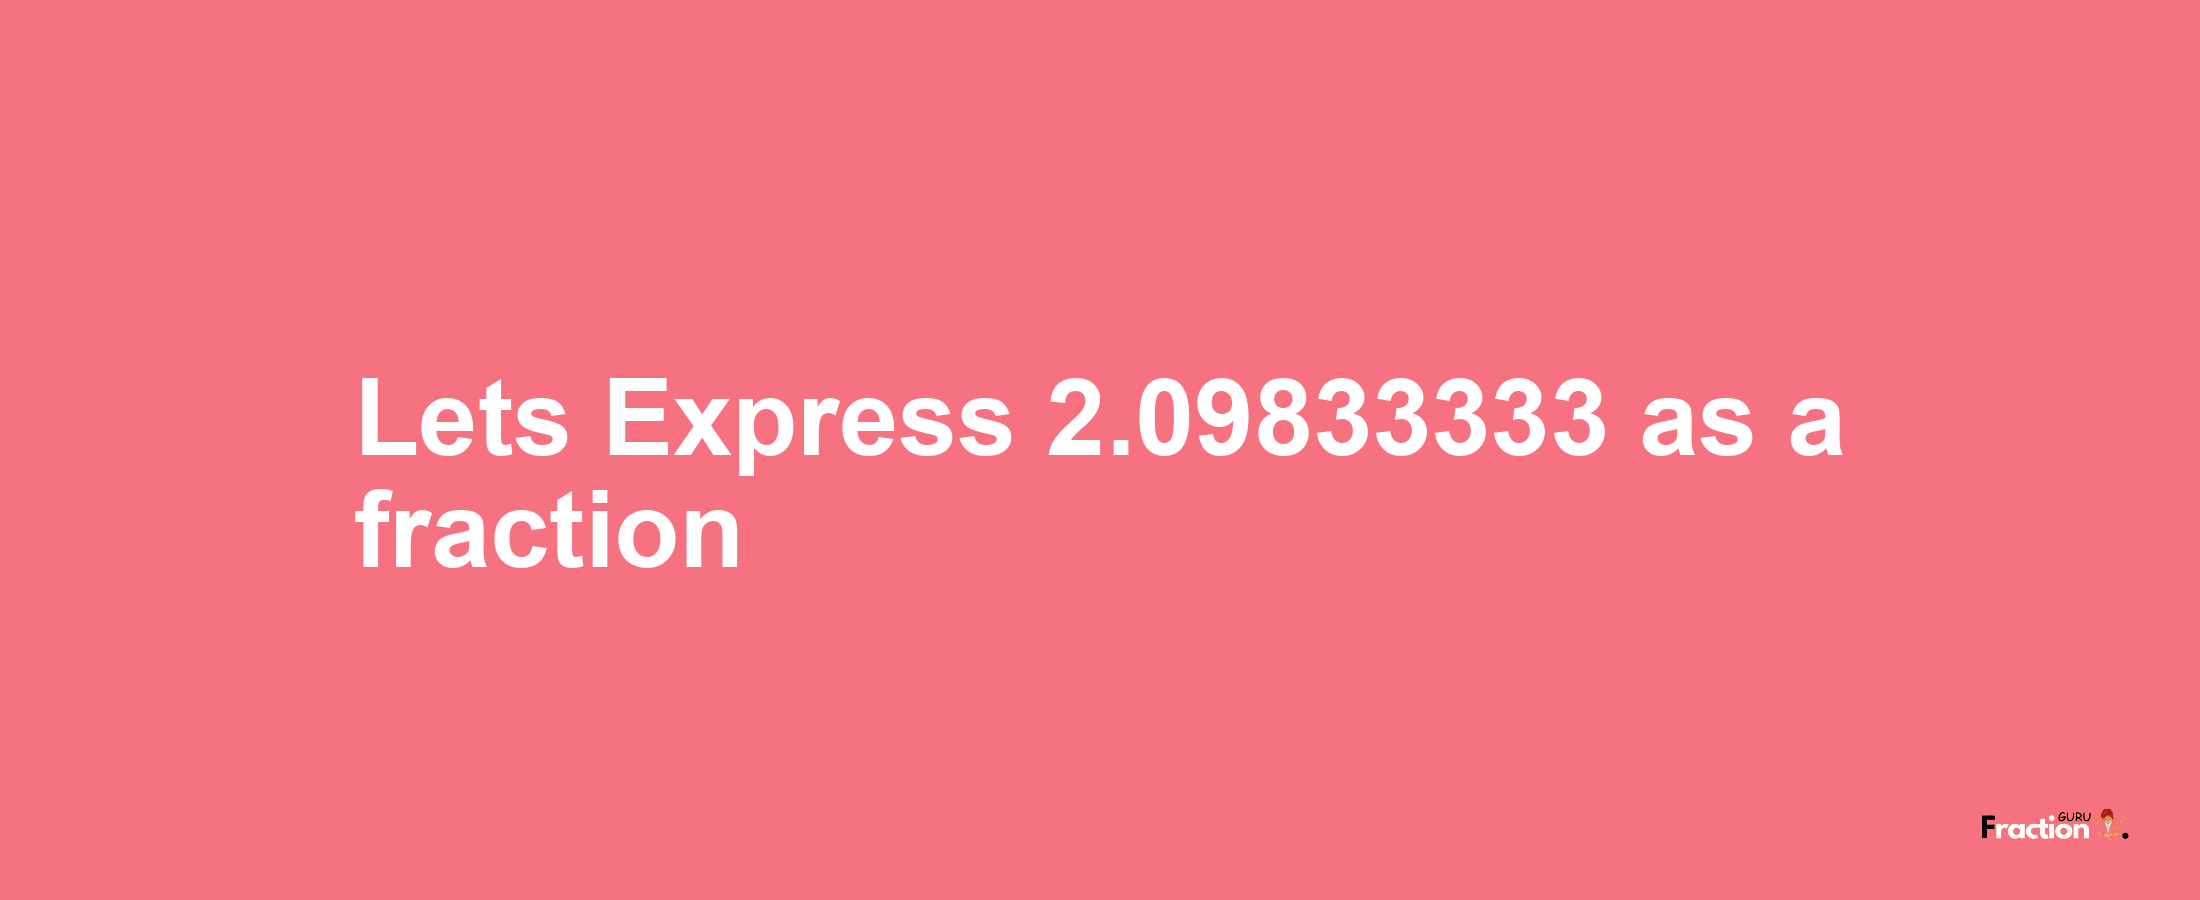 Lets Express 2.09833333 as afraction